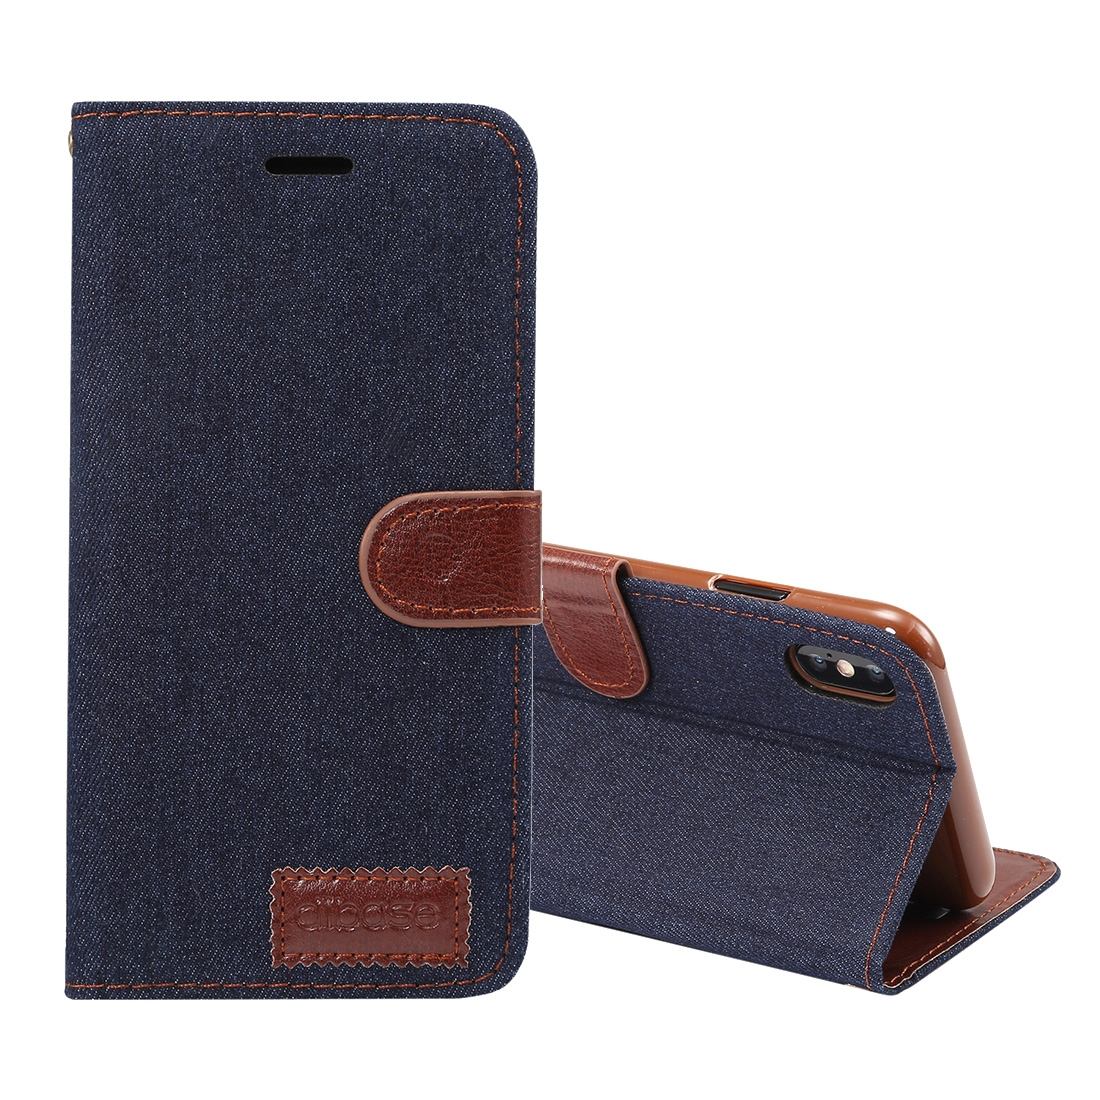 For iPhone XS MAX Cover,Wallet Leather Case with 2 Card Slots Stand,Denim Black